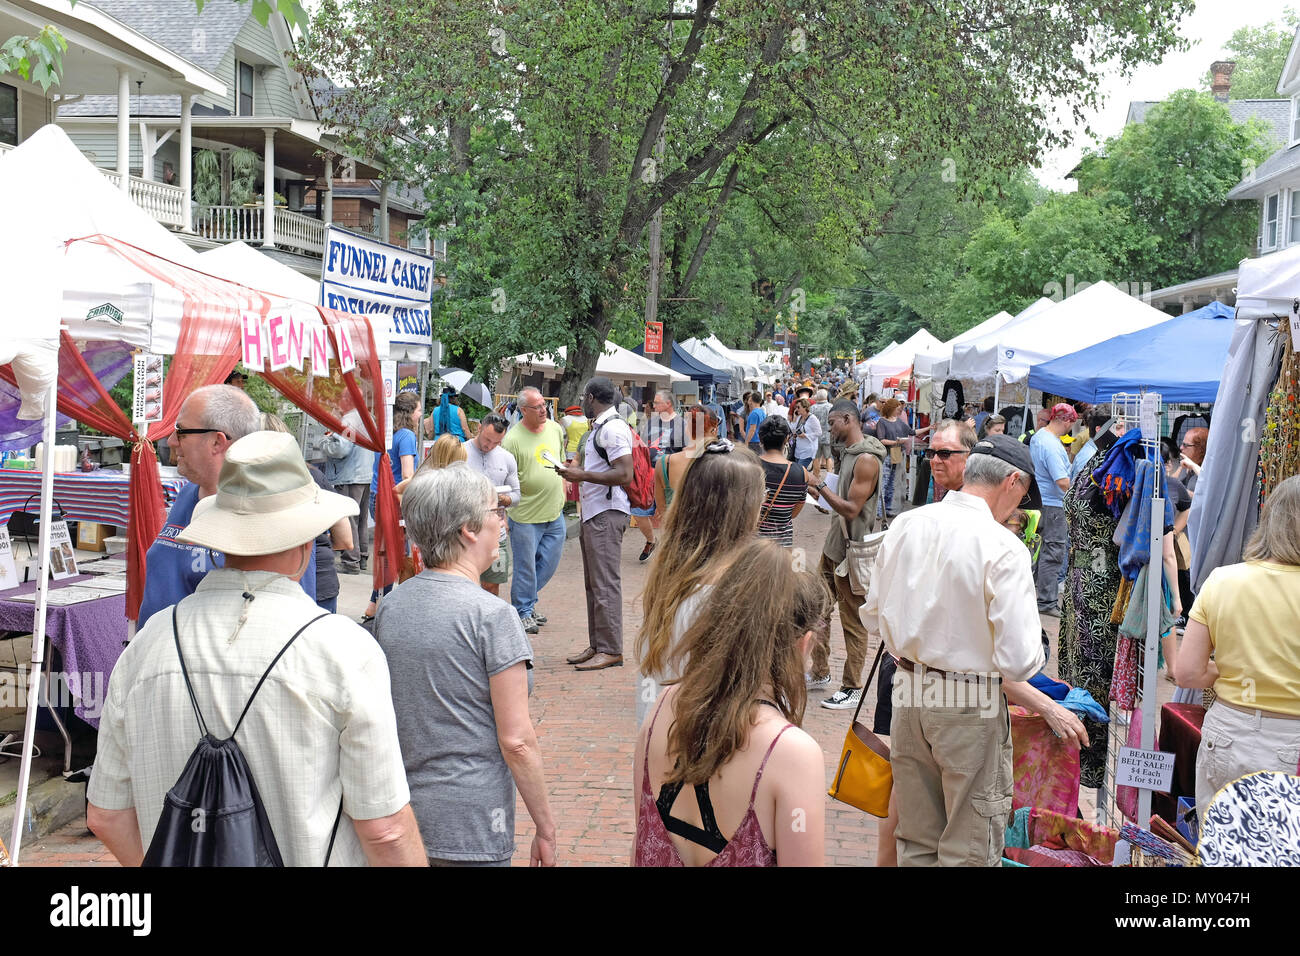 Hessler Street visitors take to the street at the 49th Annual Hessler Street Fair, a fair promoting community awareness, togetherness, and harmony. Stock Photo